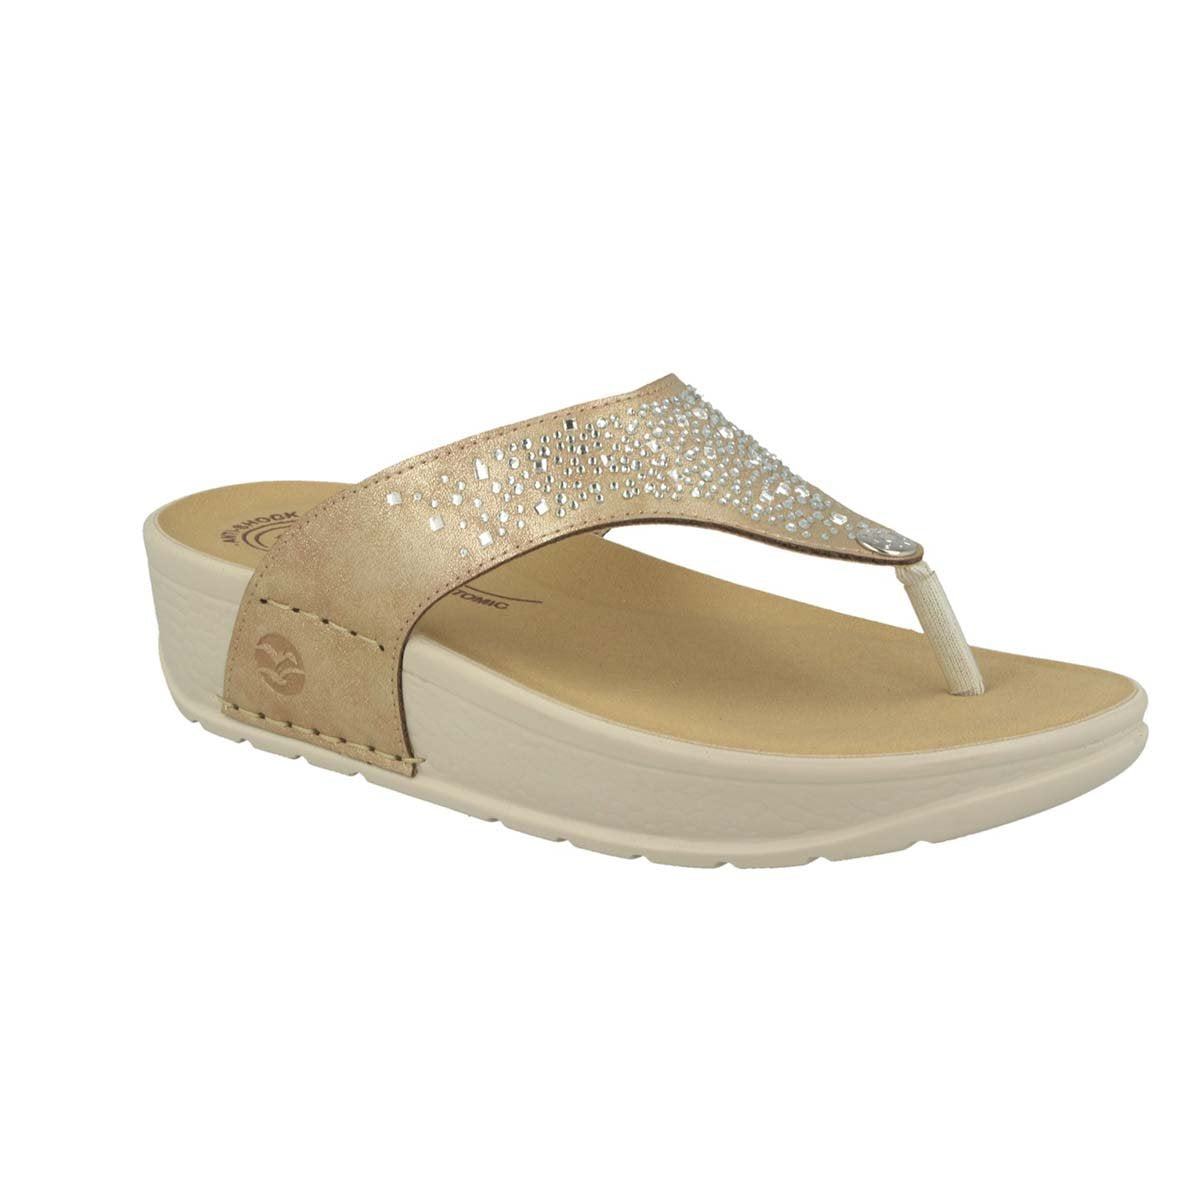 Photo of the Synthetic Woman Slipper Gold (38e60a2)